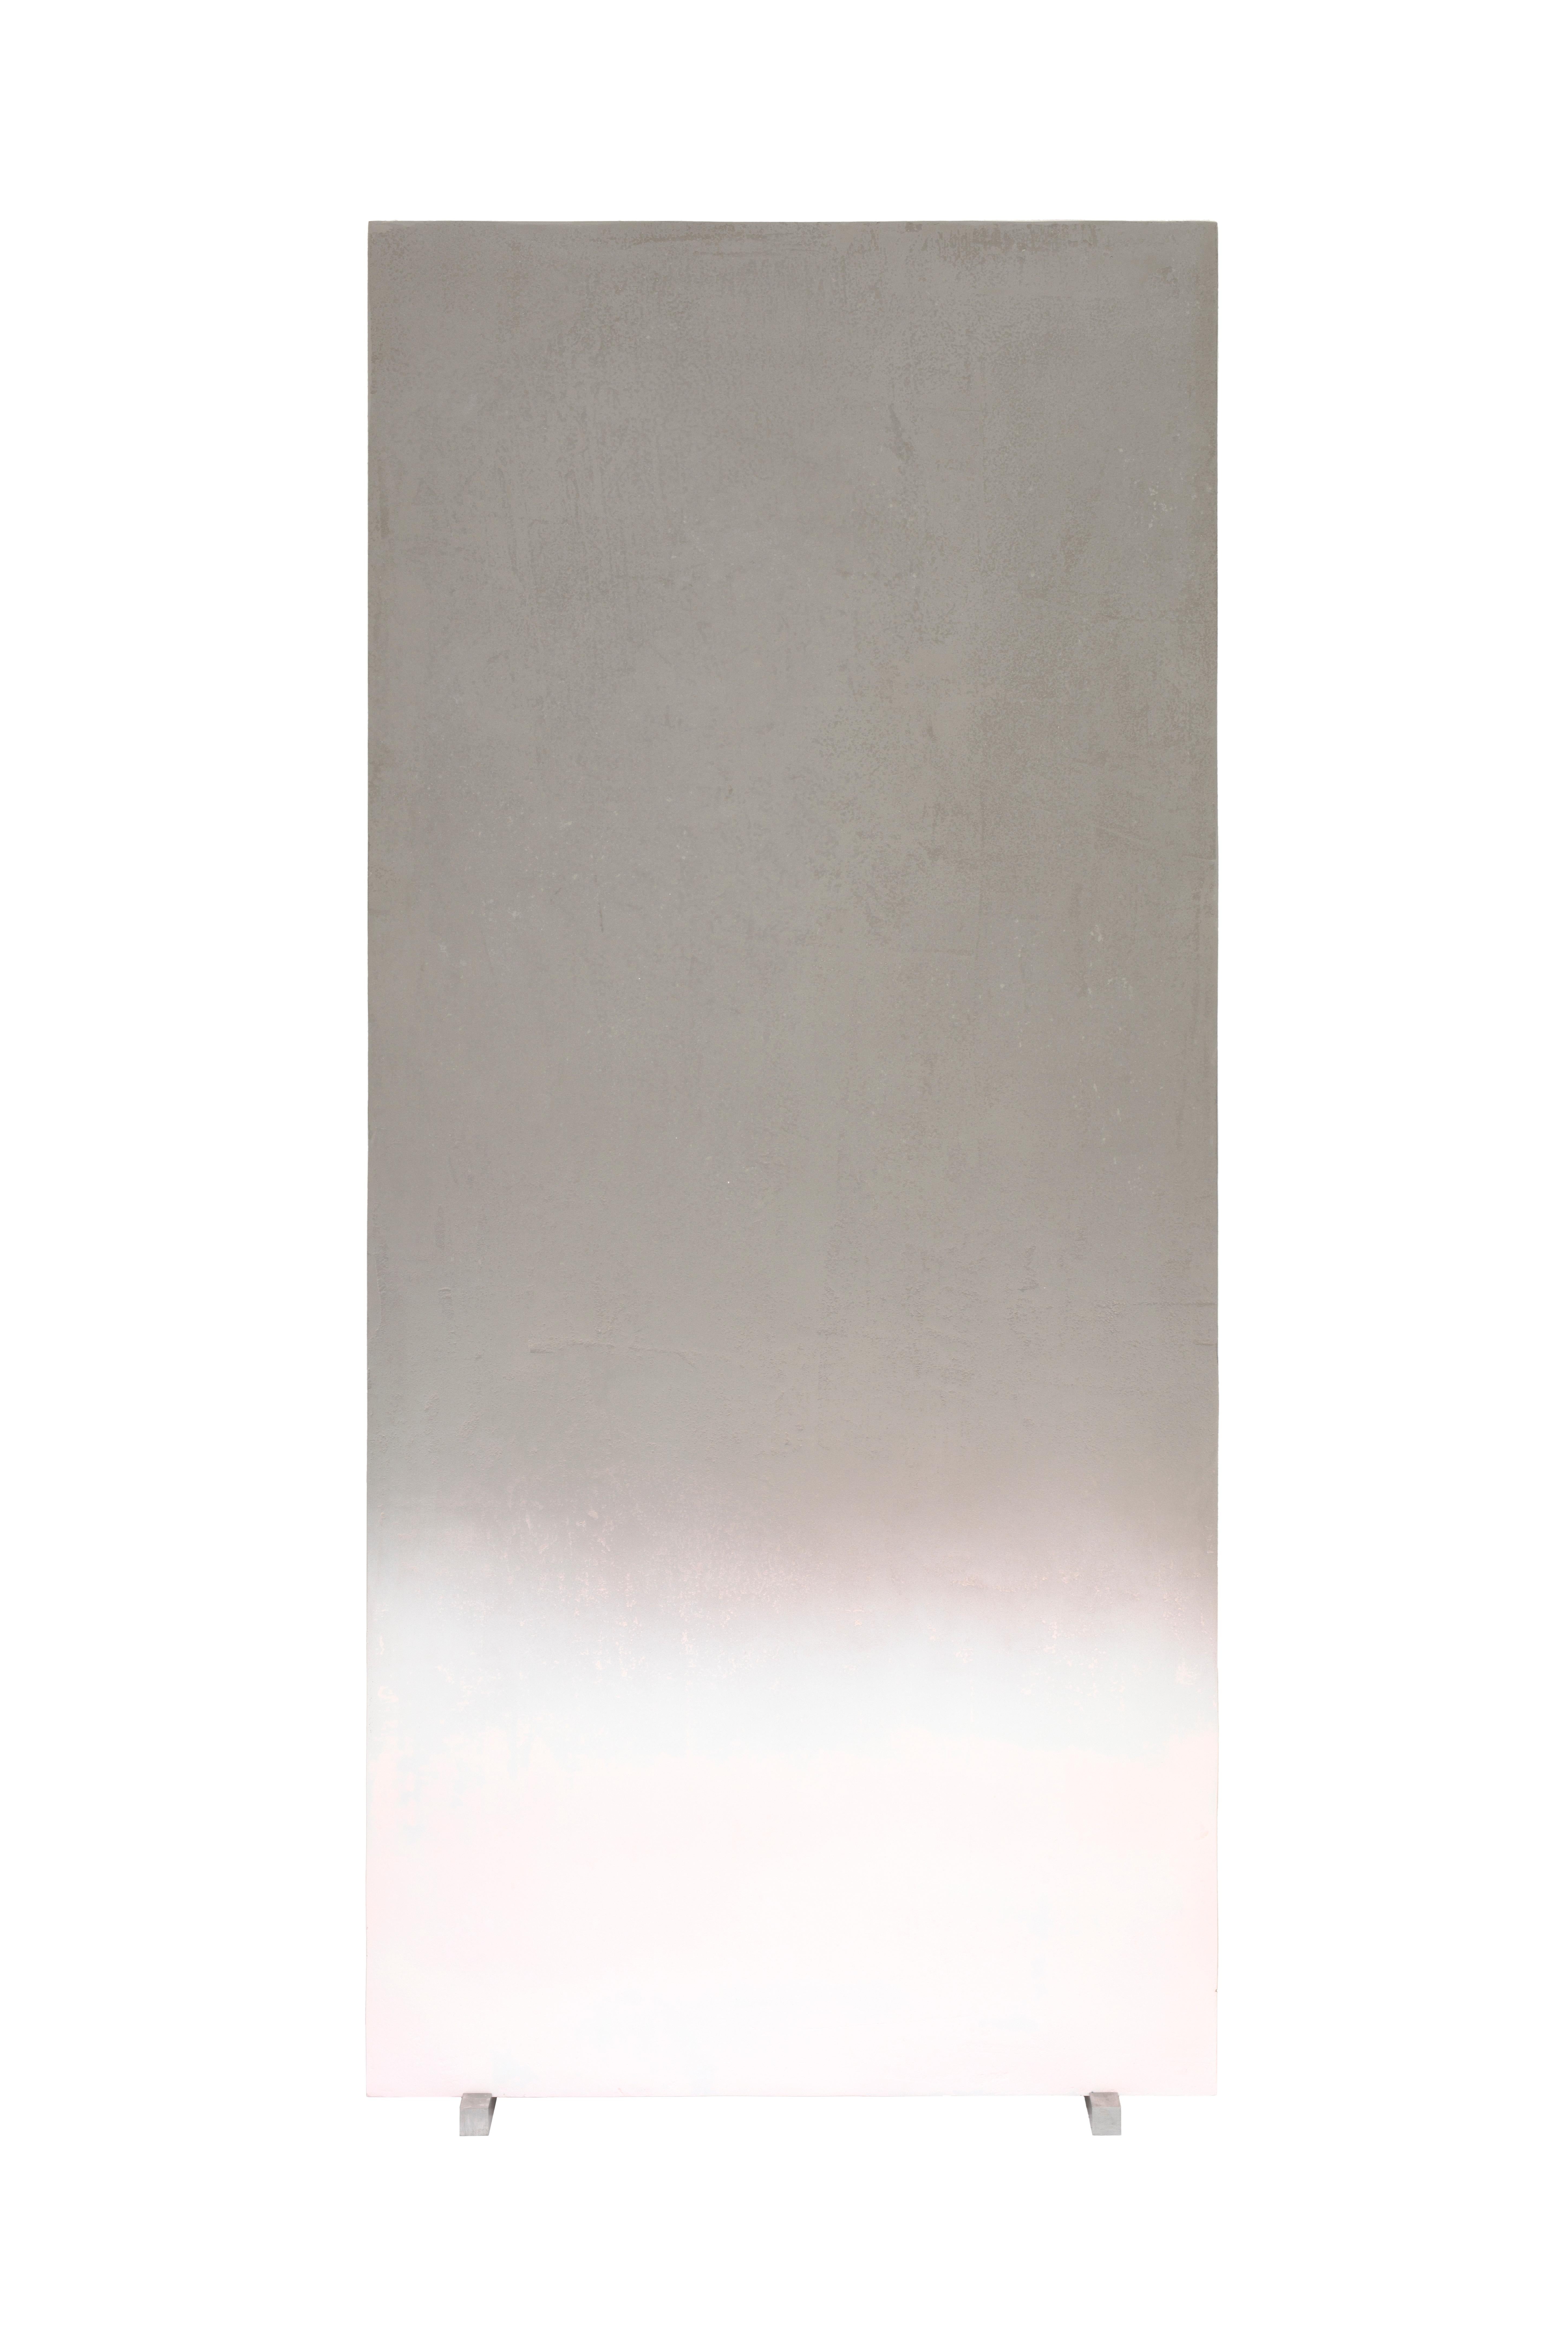 Pennacchio Argentato, Slab Charge, 2011 - ongoing, mixed material, white